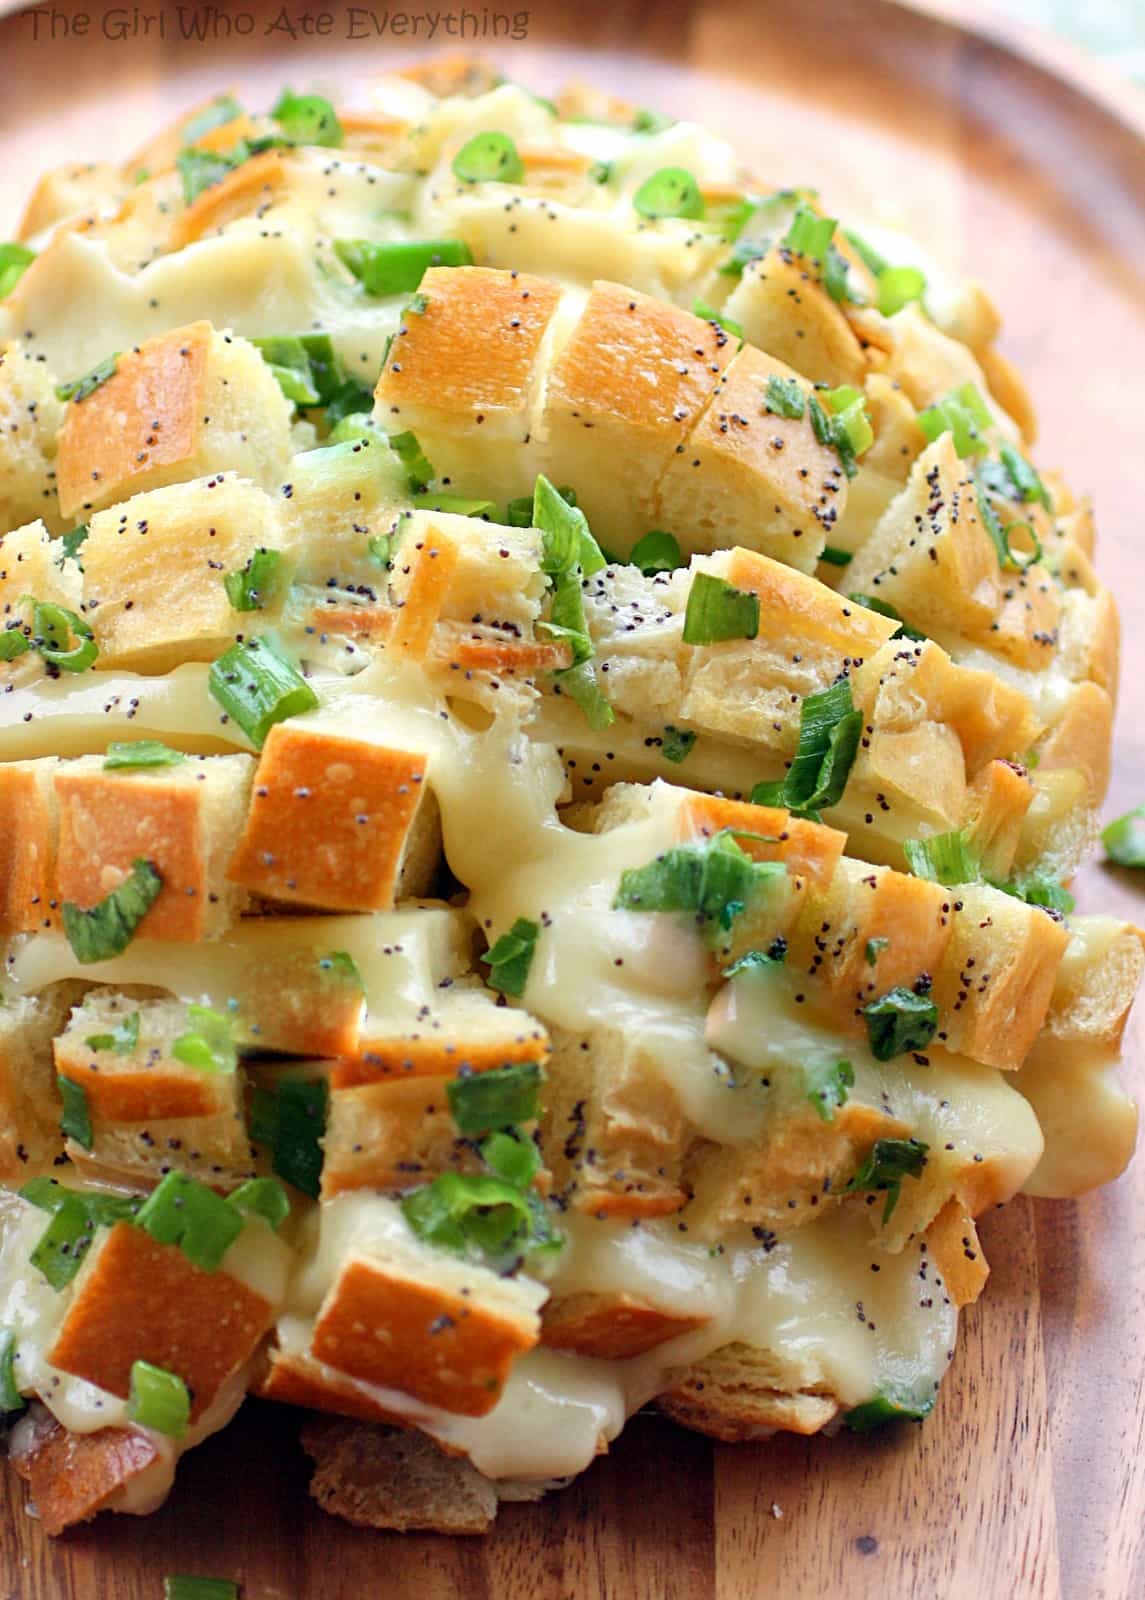 Bloomin' Onion Bread - one of my favorite party appetizers. the-girl-who-ate-everything.com